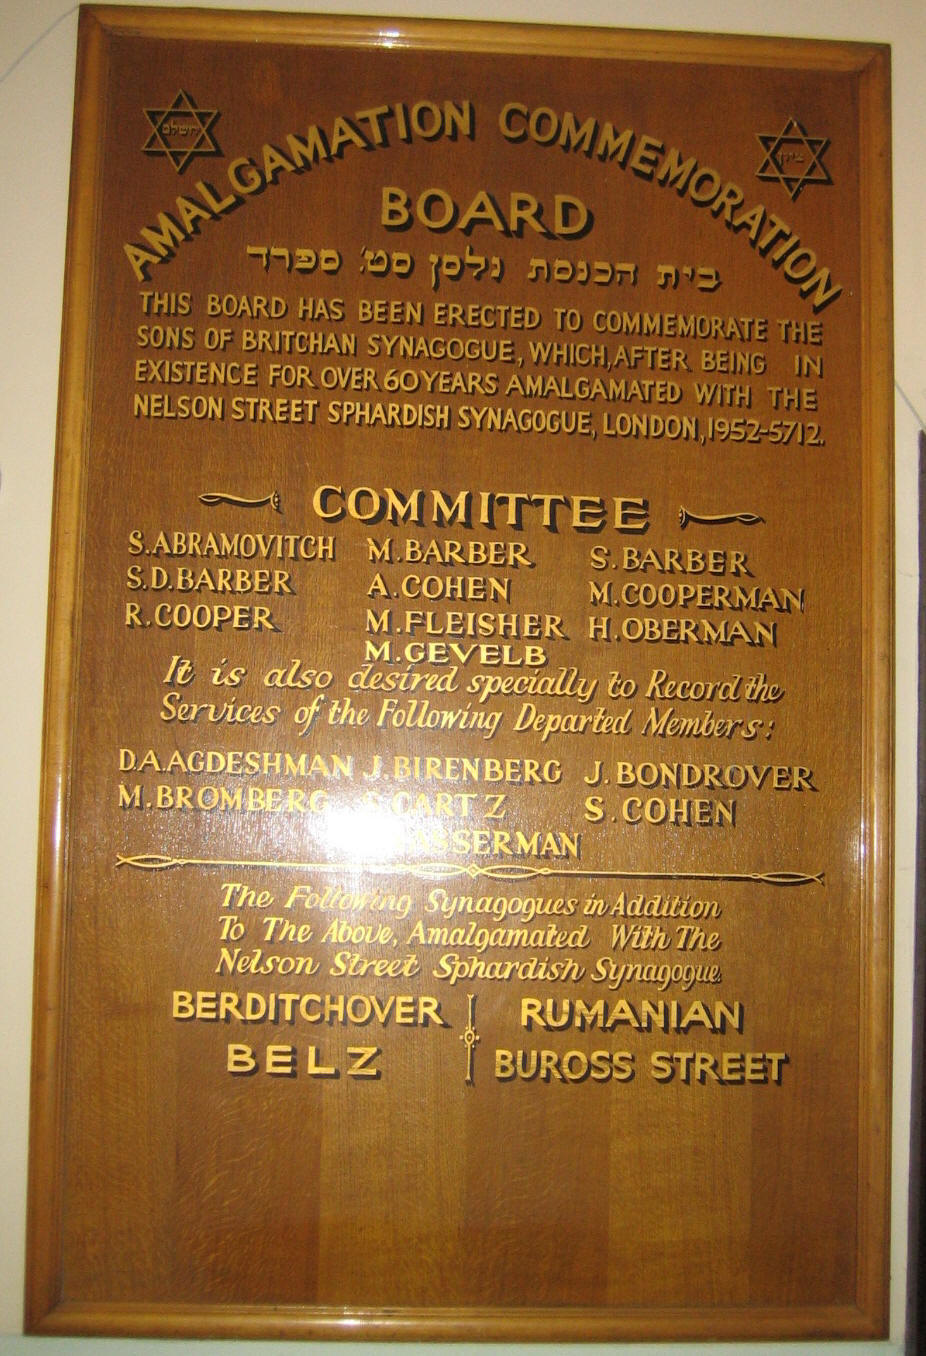 The amalgamation plaque in the lobby of Nelson Street synagogue, commemorating the Belzer synagogue among others